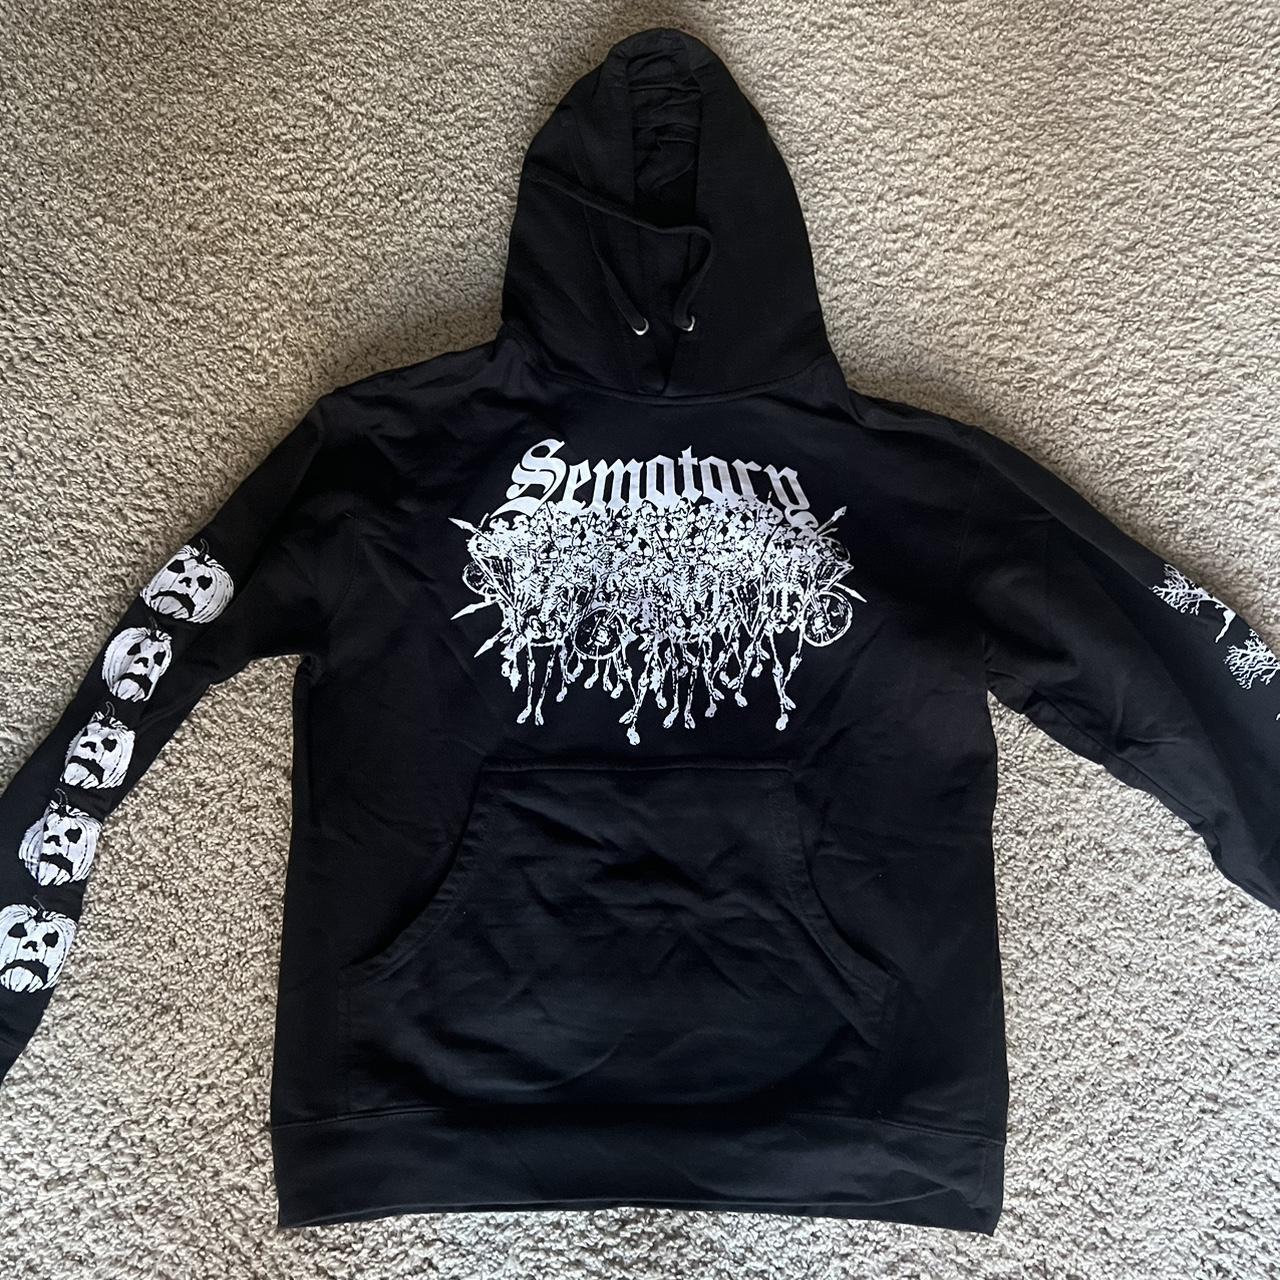 Sematary butcher house tour hoodie size M Real... - Depop